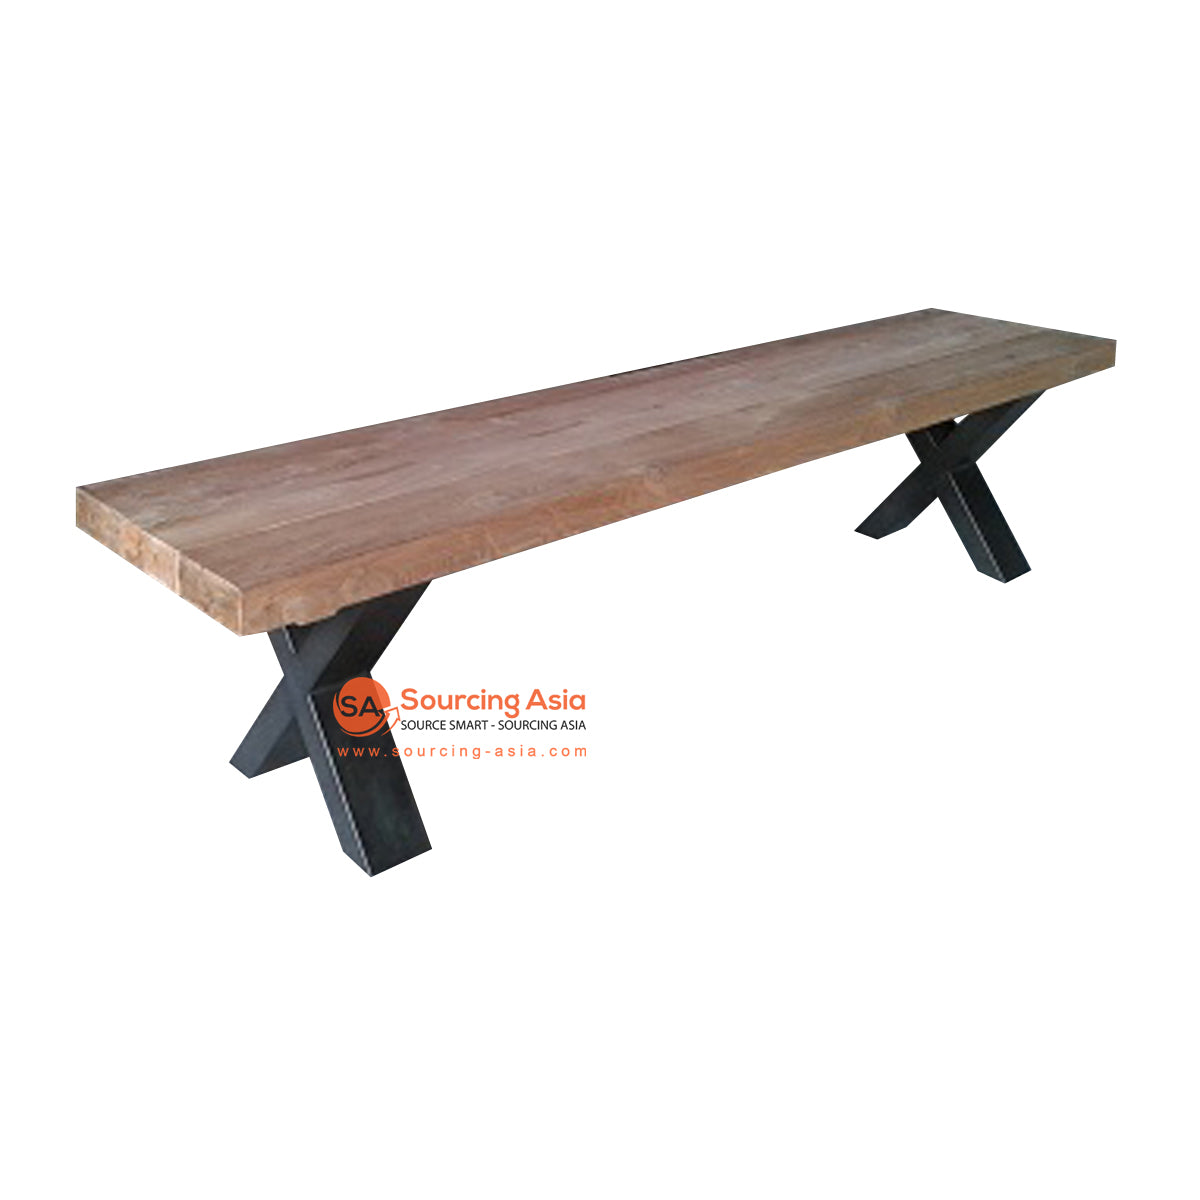 ECL047-150X40 NATURAL RECYCLED TEAK WOOD AND METAL OUTDOOR BENCH